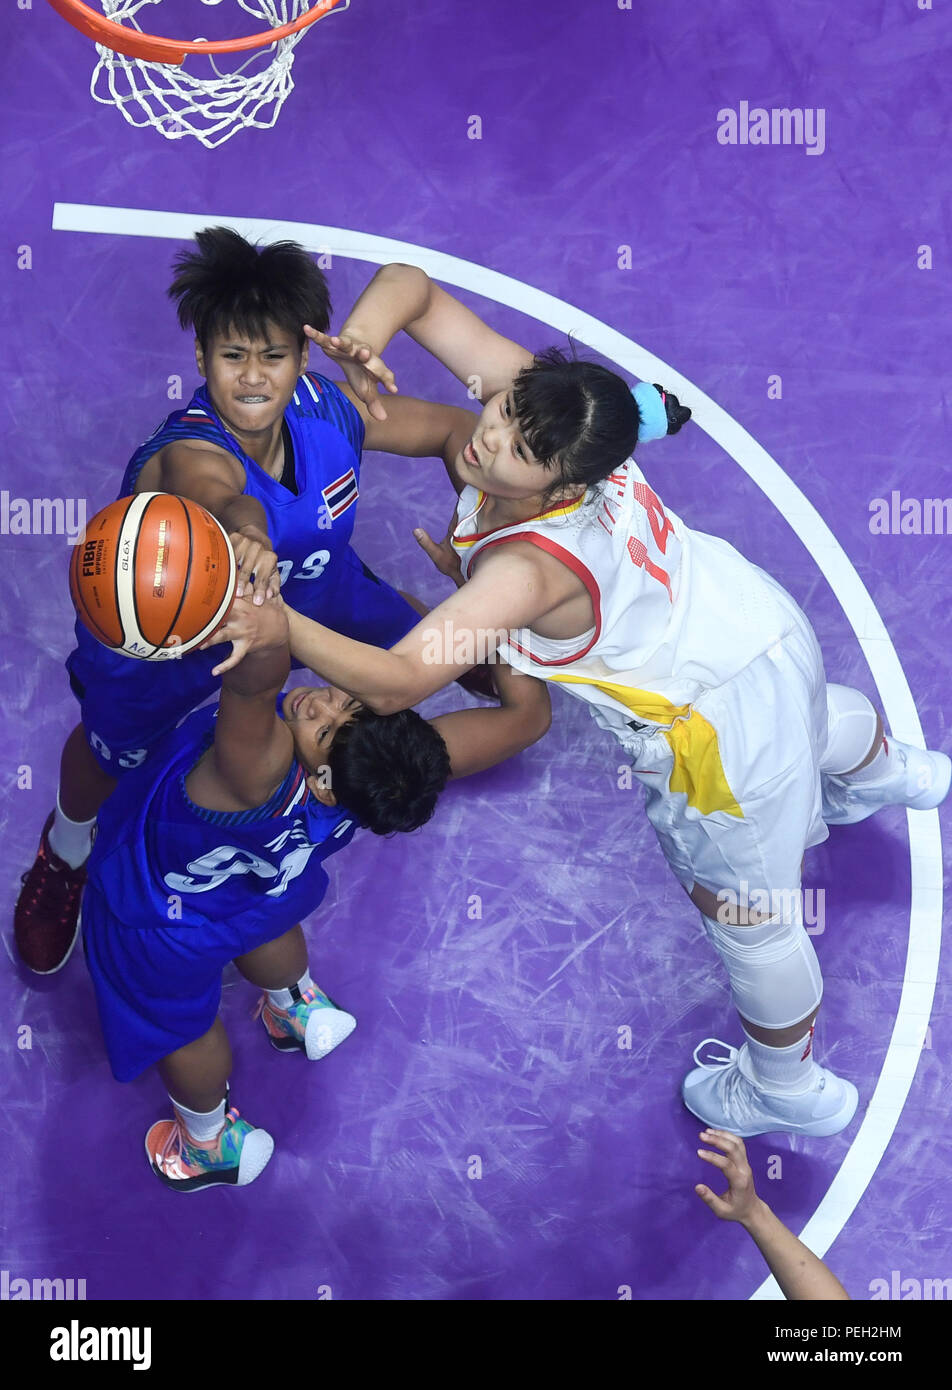 Jakarta. 15th Aug, 2018. Li Yueru (R) of China competes during the women's  basketball 5x5 Group B match between China and Thailand at the Asian Games  2018 in Jakarta, Indonesia on Aug.